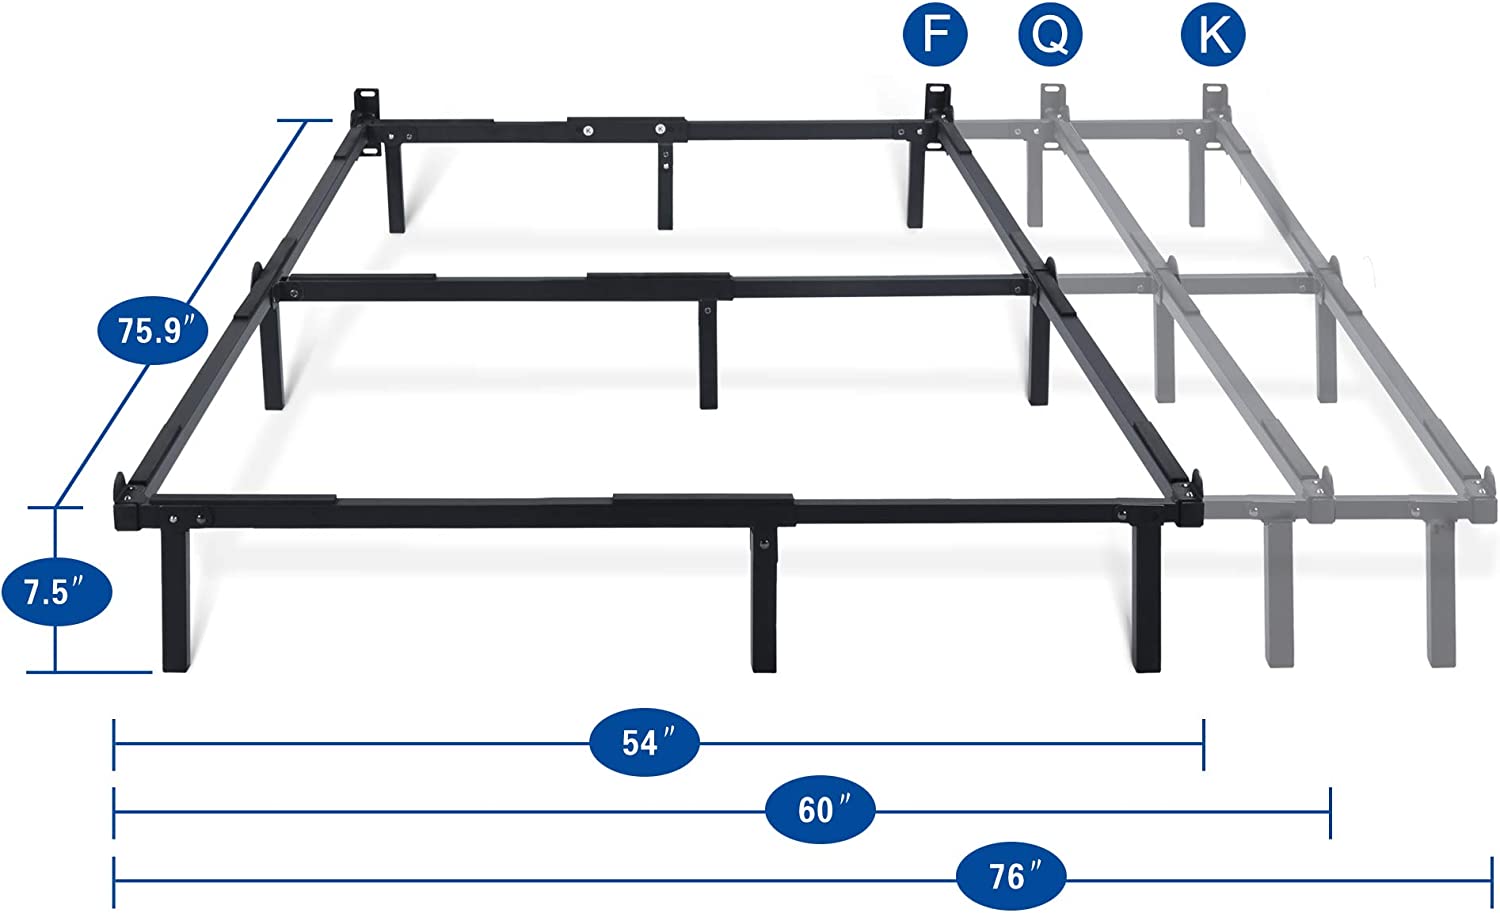 Olee Sleep 7 Inch Dura Metal Compact Steel Bed Frame, Adjustable for Full Queen King, Tool Free, Easy Assembly, Non Slip for Mattress & Box Spring - Airbnb Ambassador